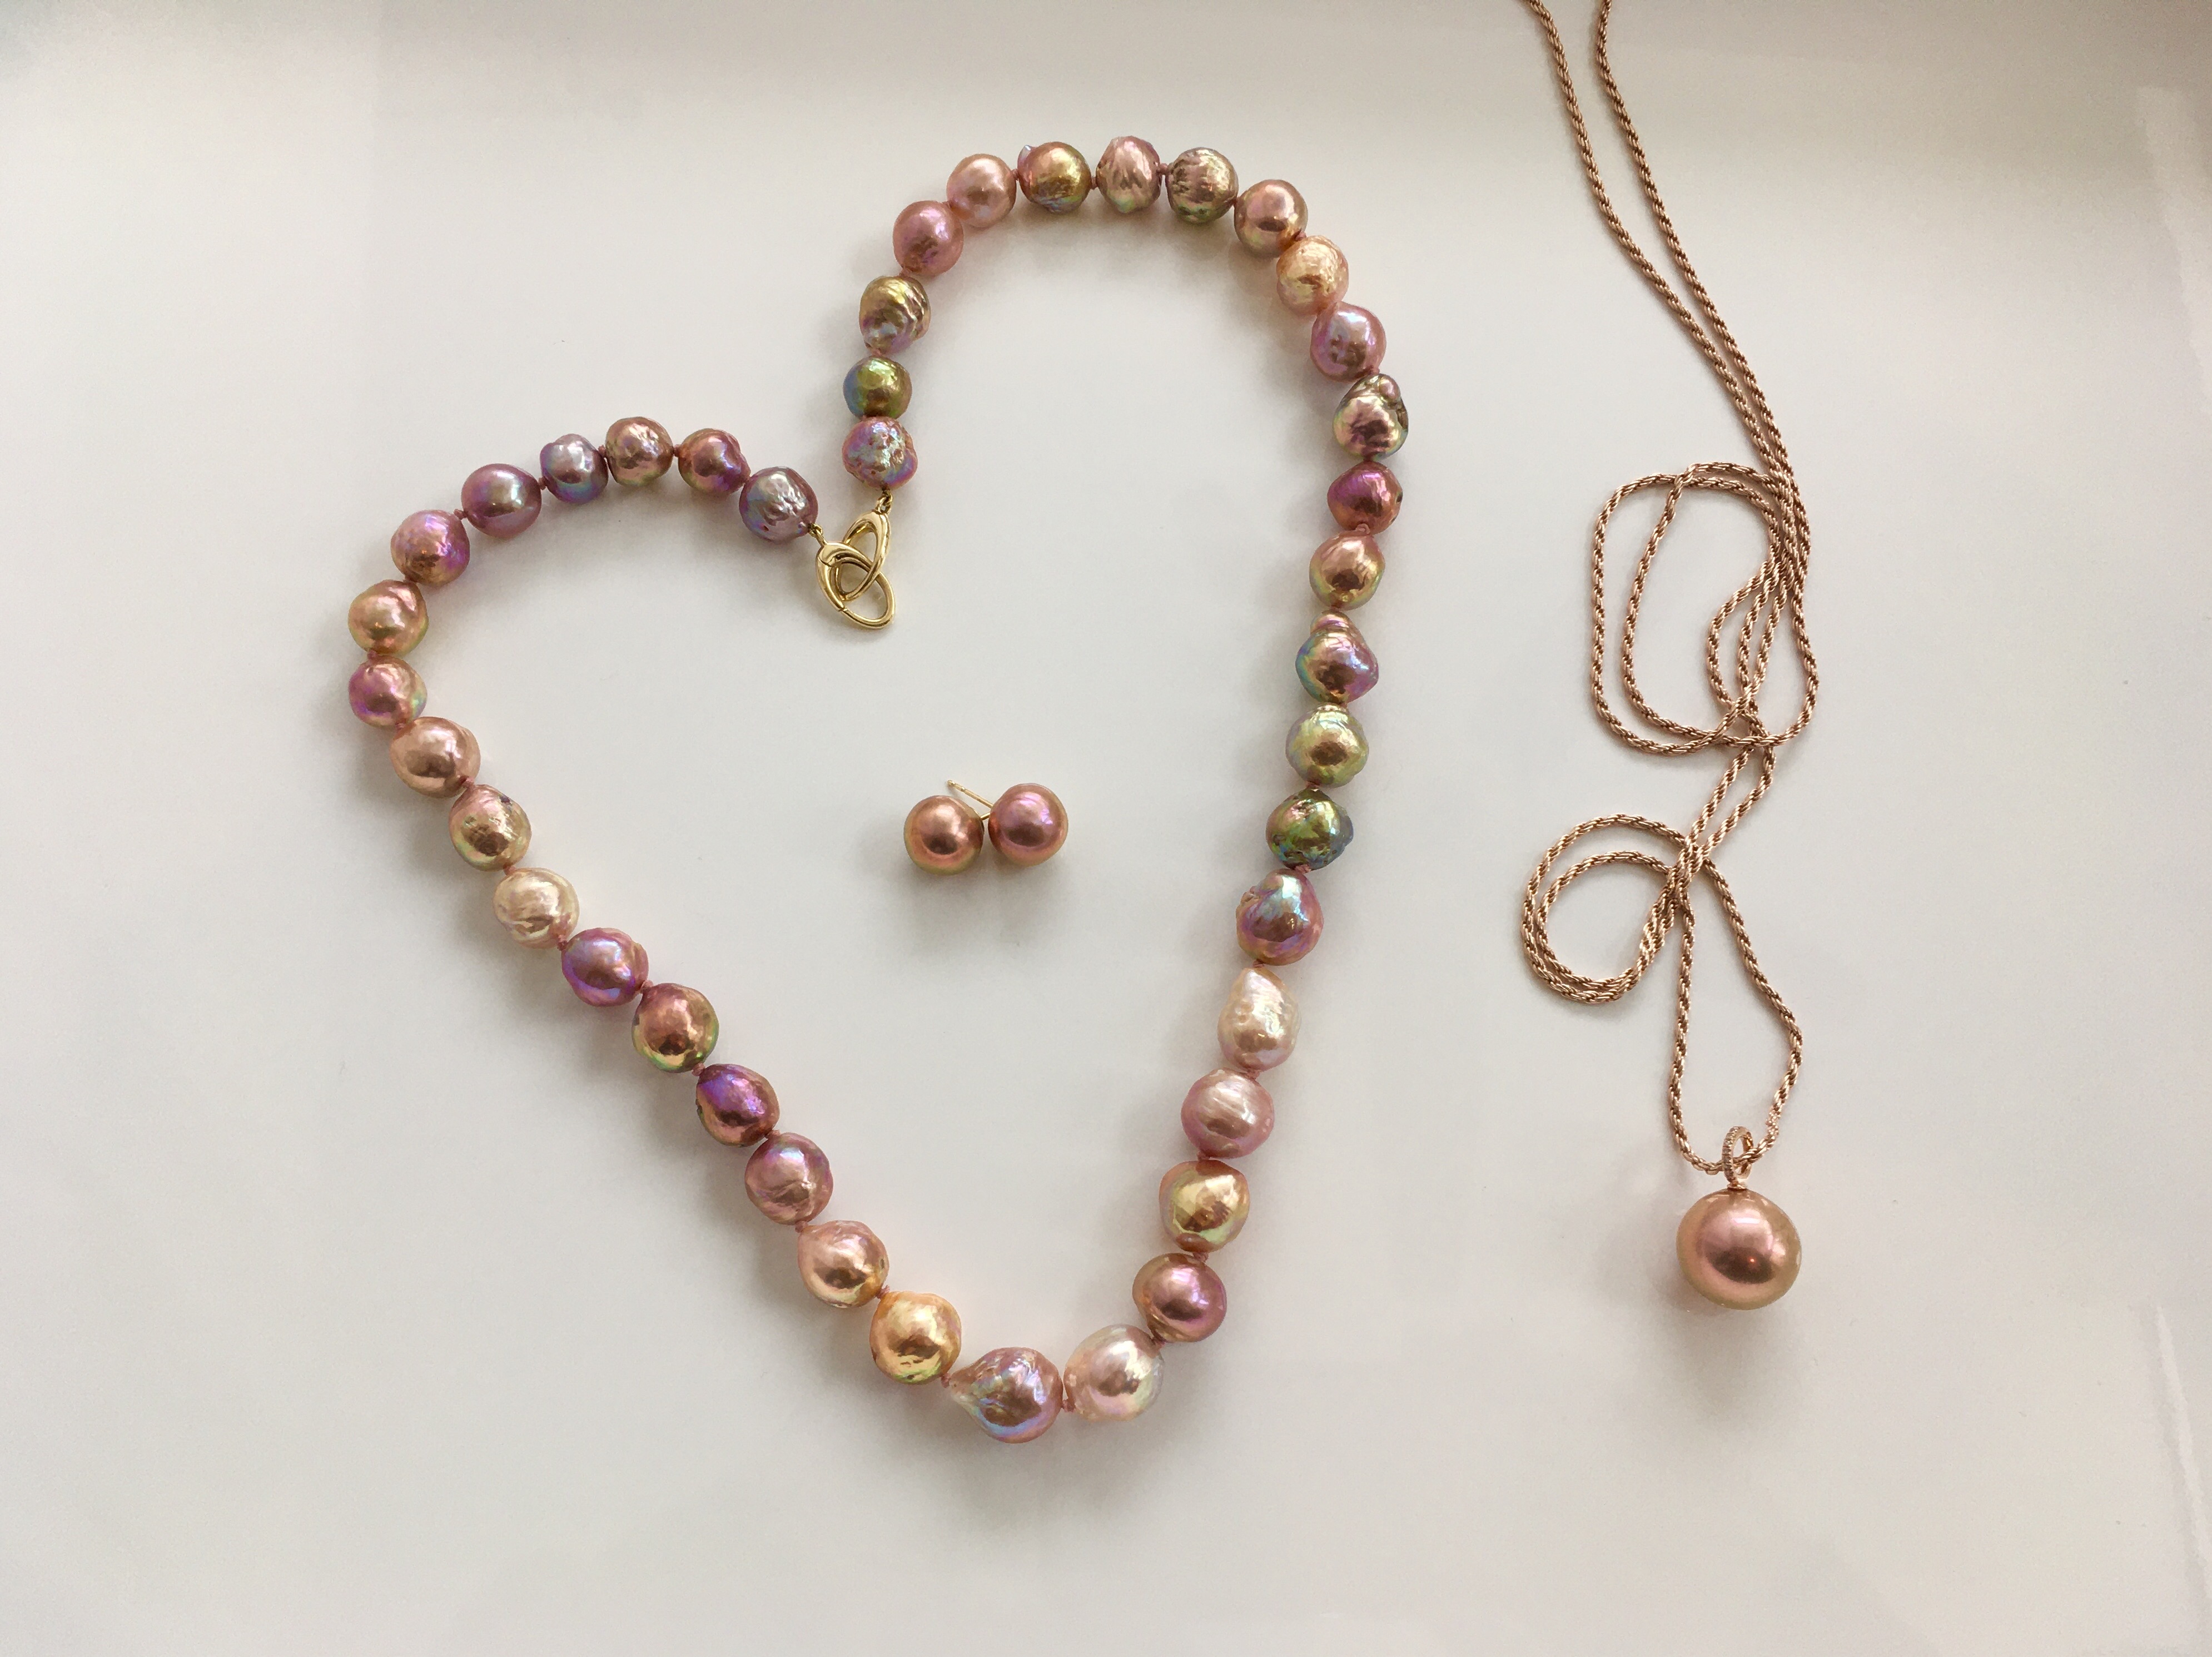  pendant is an Edison pearl from PP And a special strand that was the 2019 top harvest strand